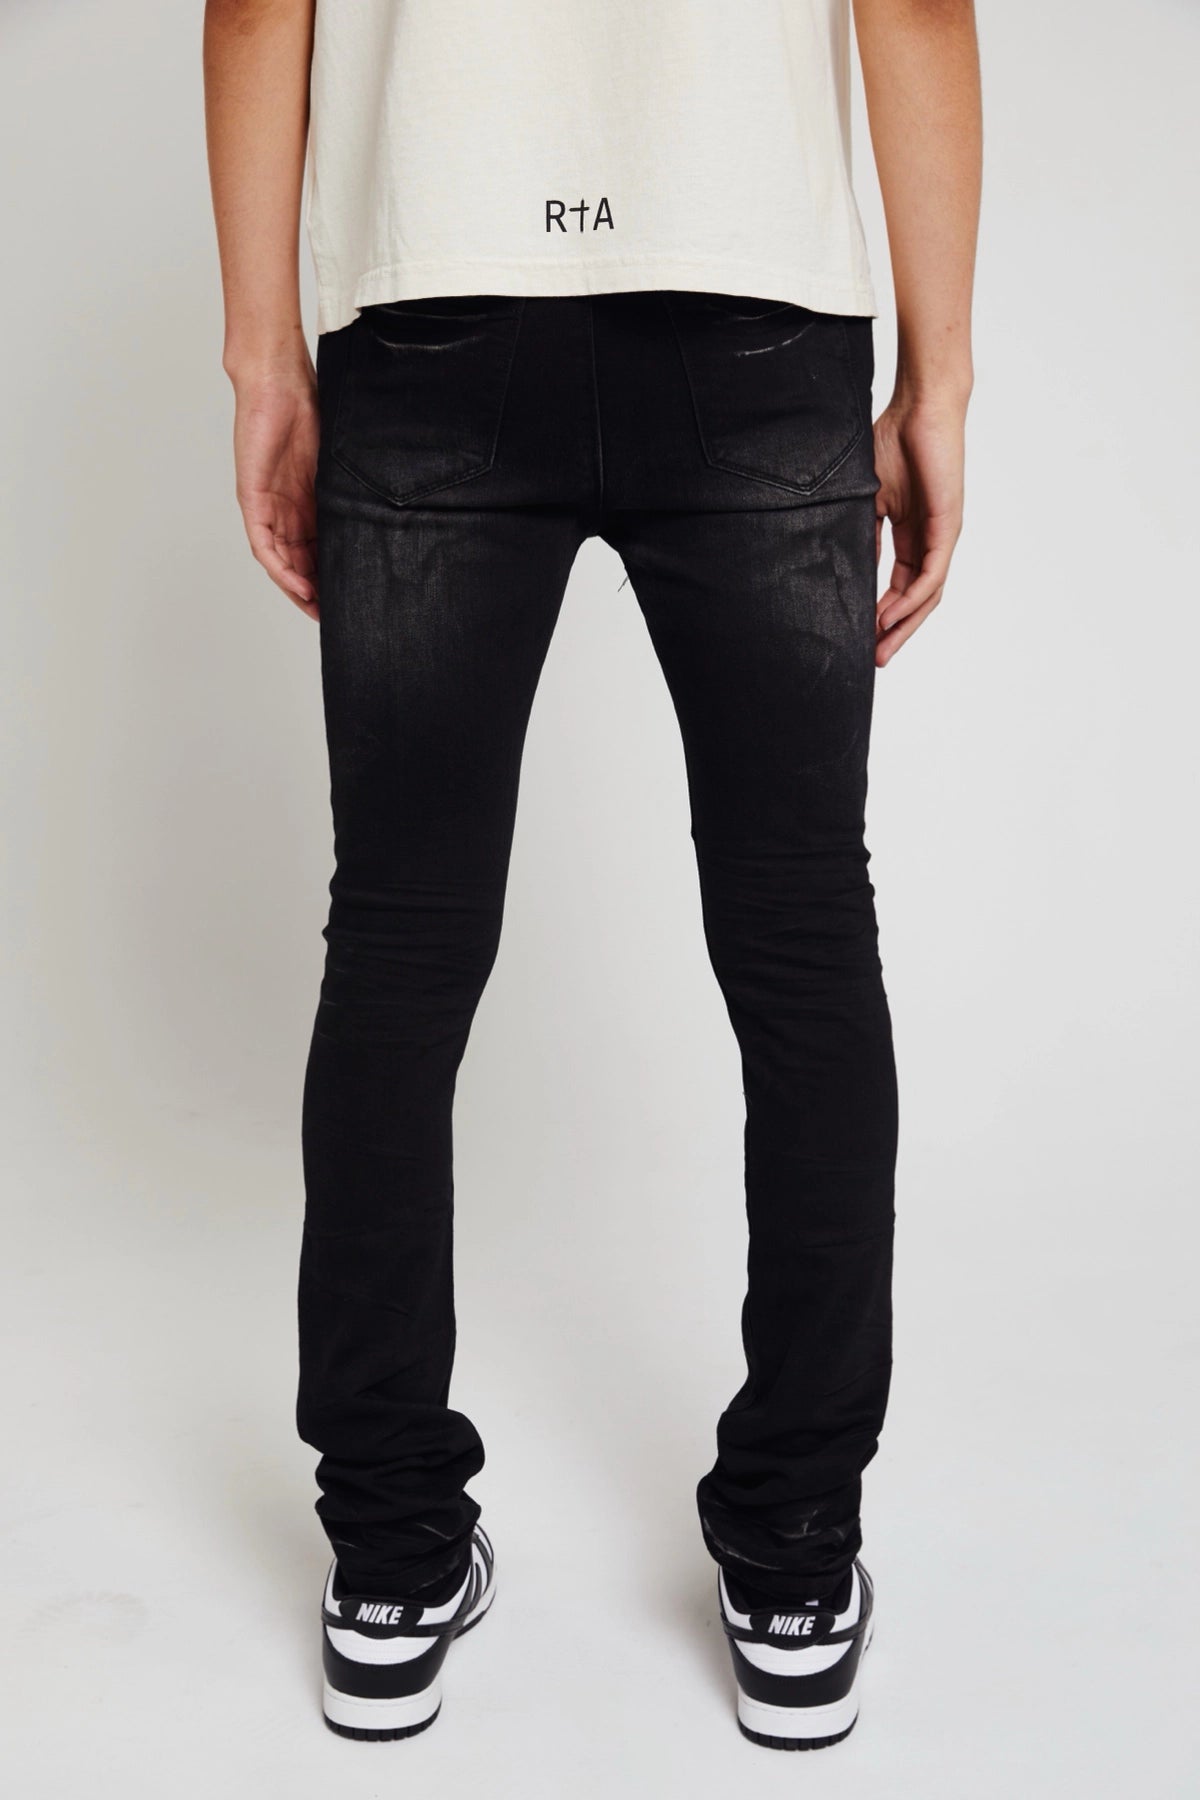 OLIVIER JEAN | STACKED WORN OUT BLACK